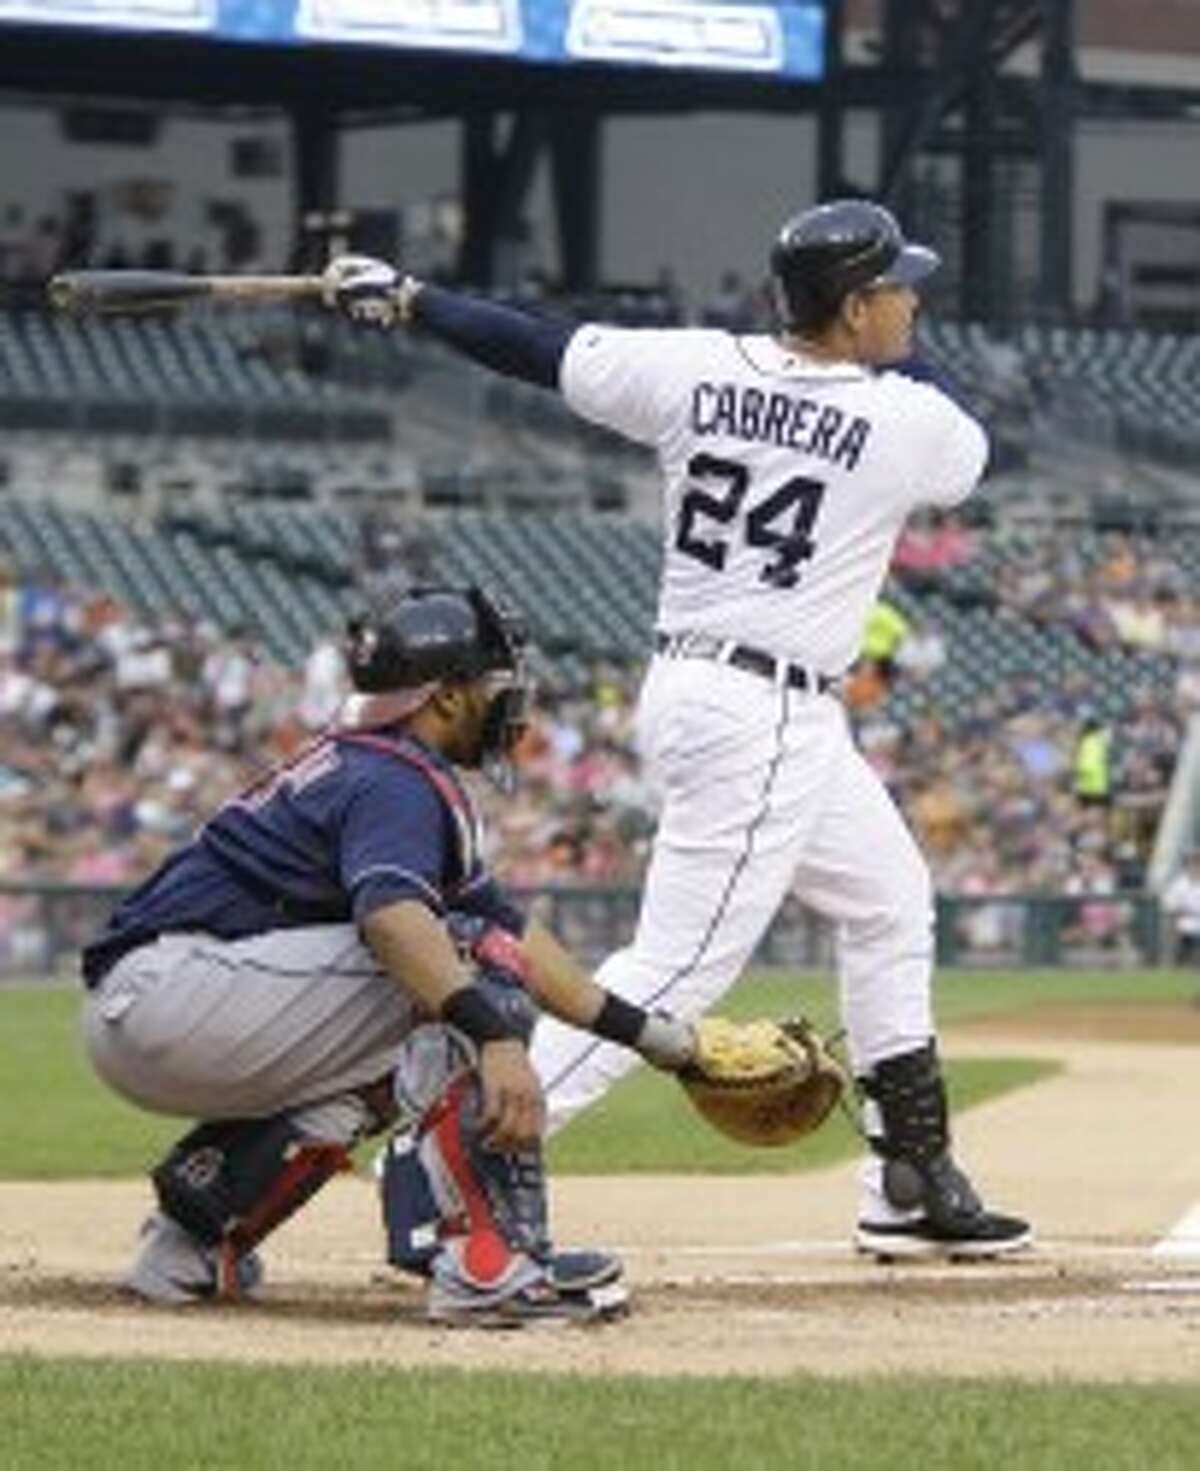 Tigers third baseman Miguel Cabrera hits a two-run homer in the first inning against the Cleveland Indians in Detroit on Wednesday. (Julian H. Gonzalez/Detroit Free Press/MCT)